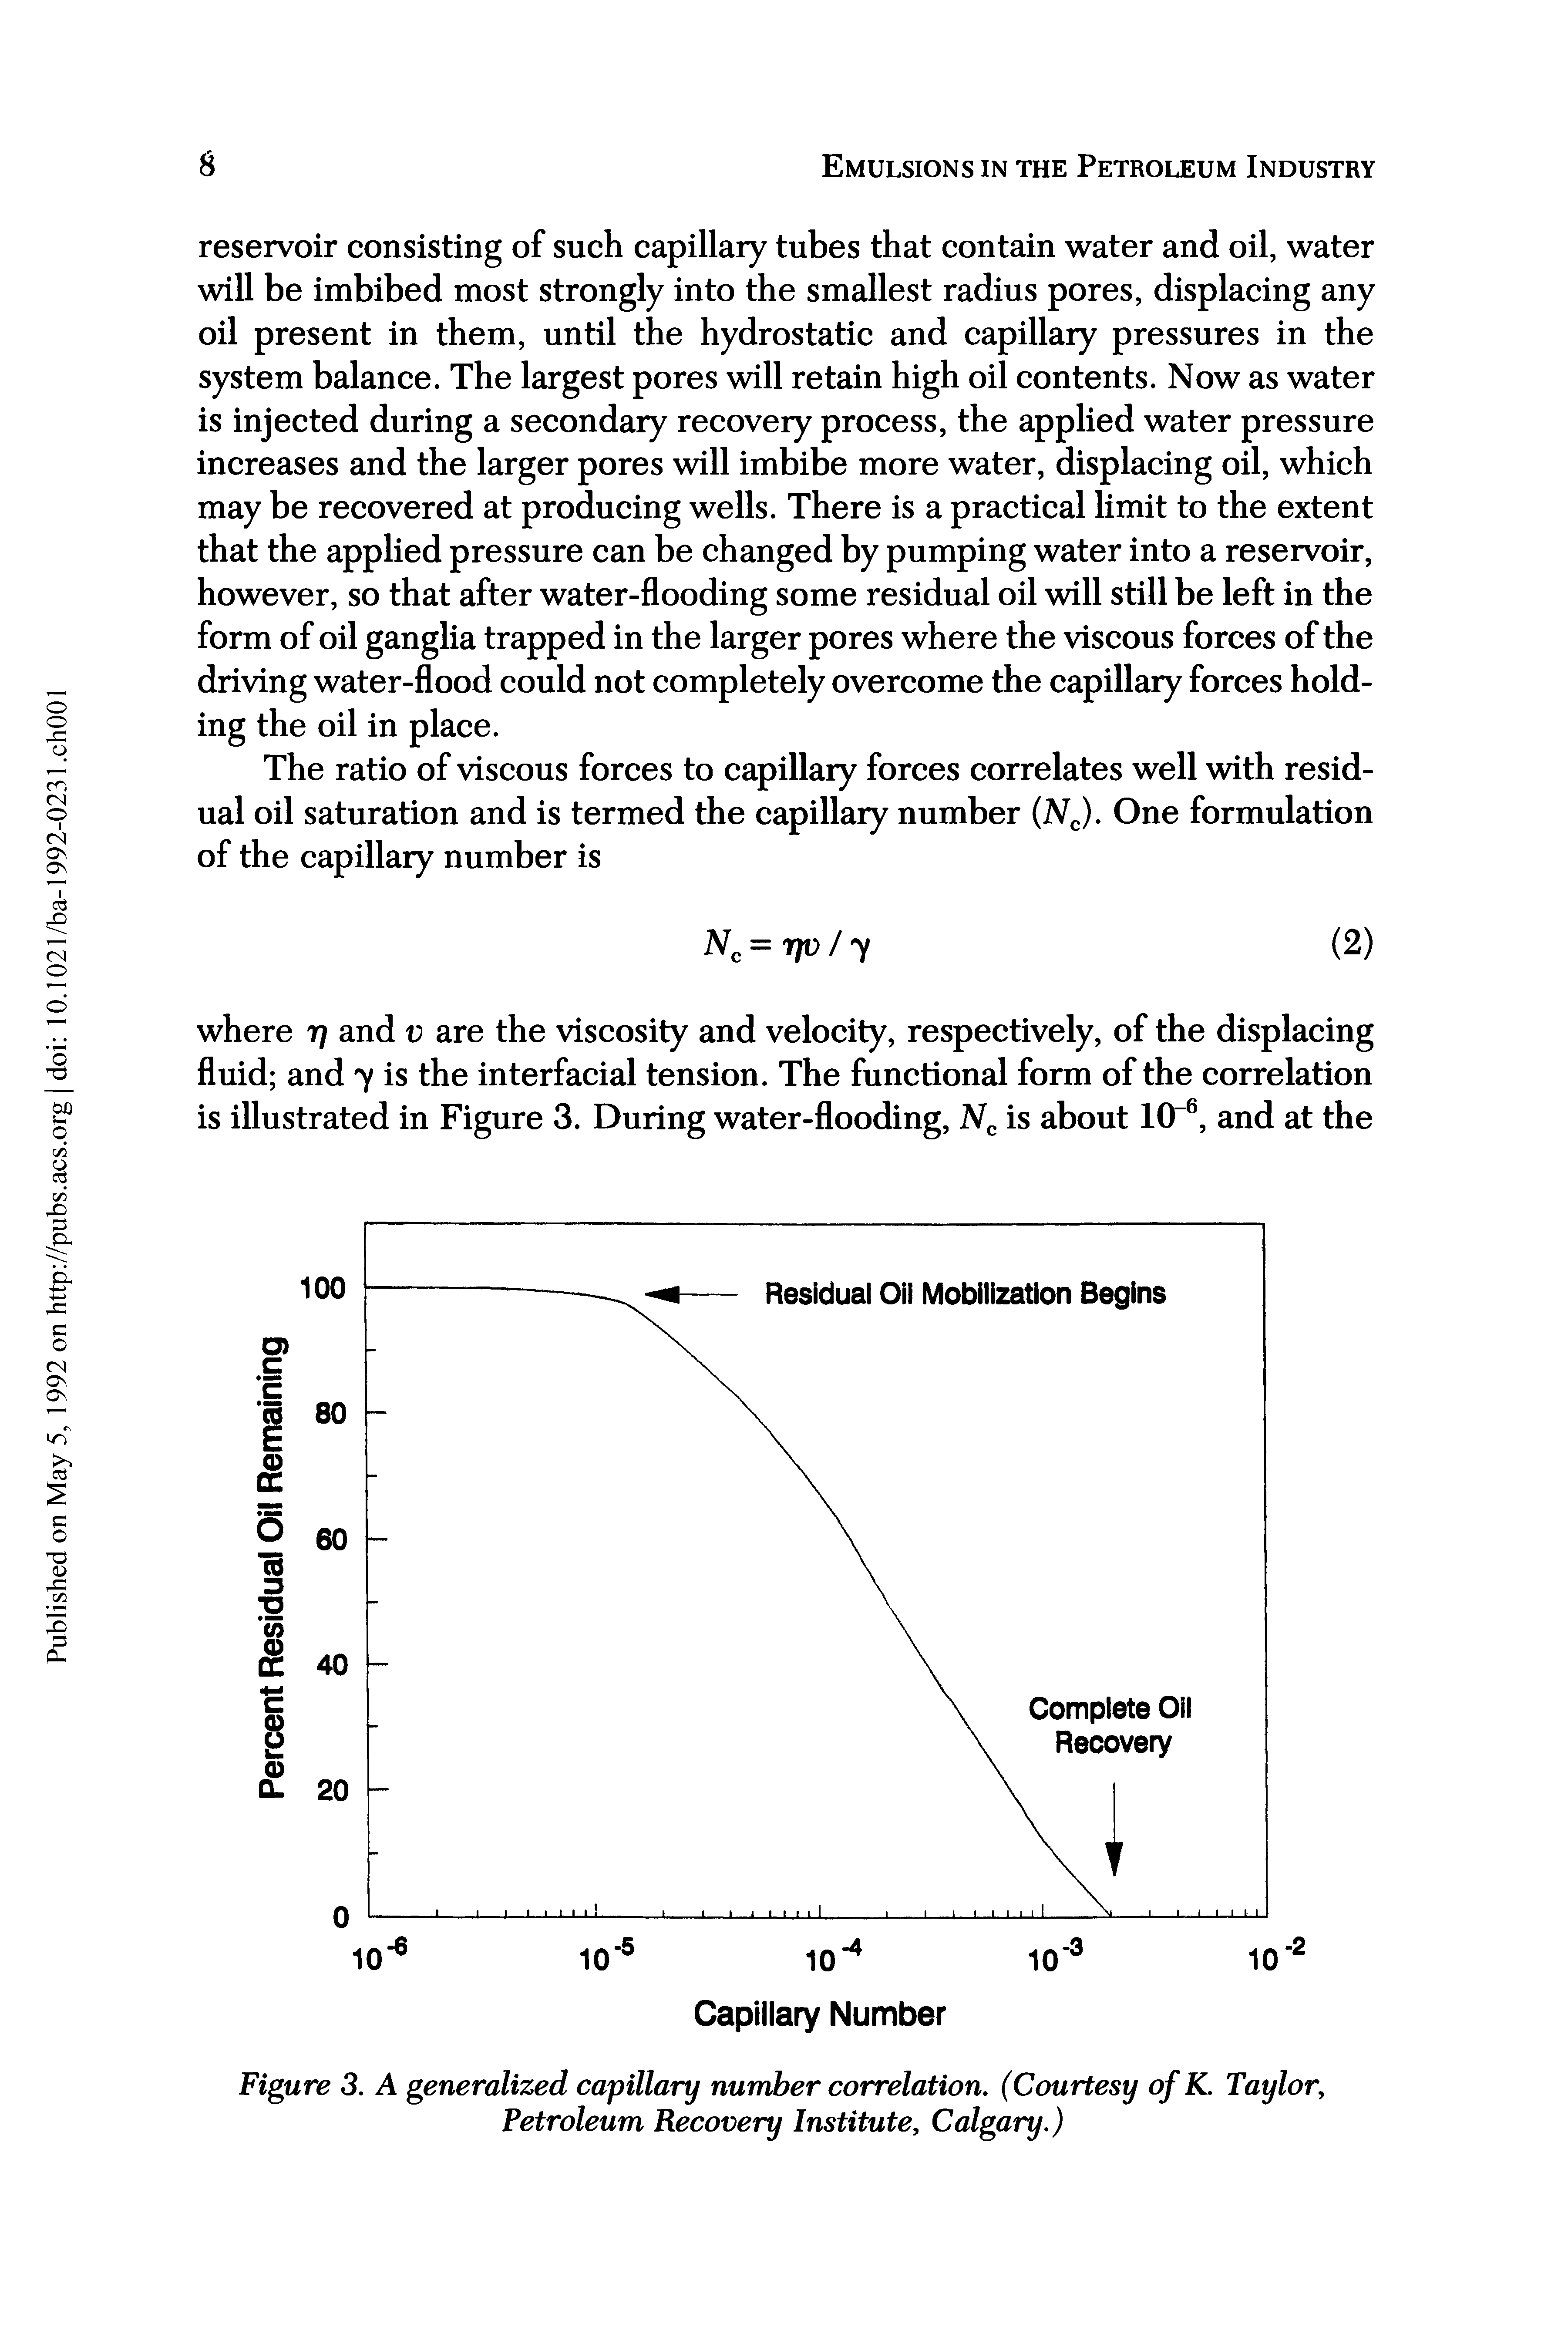 Figure 3. A generalized capillary number correlation, (Courtesy of K. Taylor, Petroleum Recovery Institute, Calgary.)...